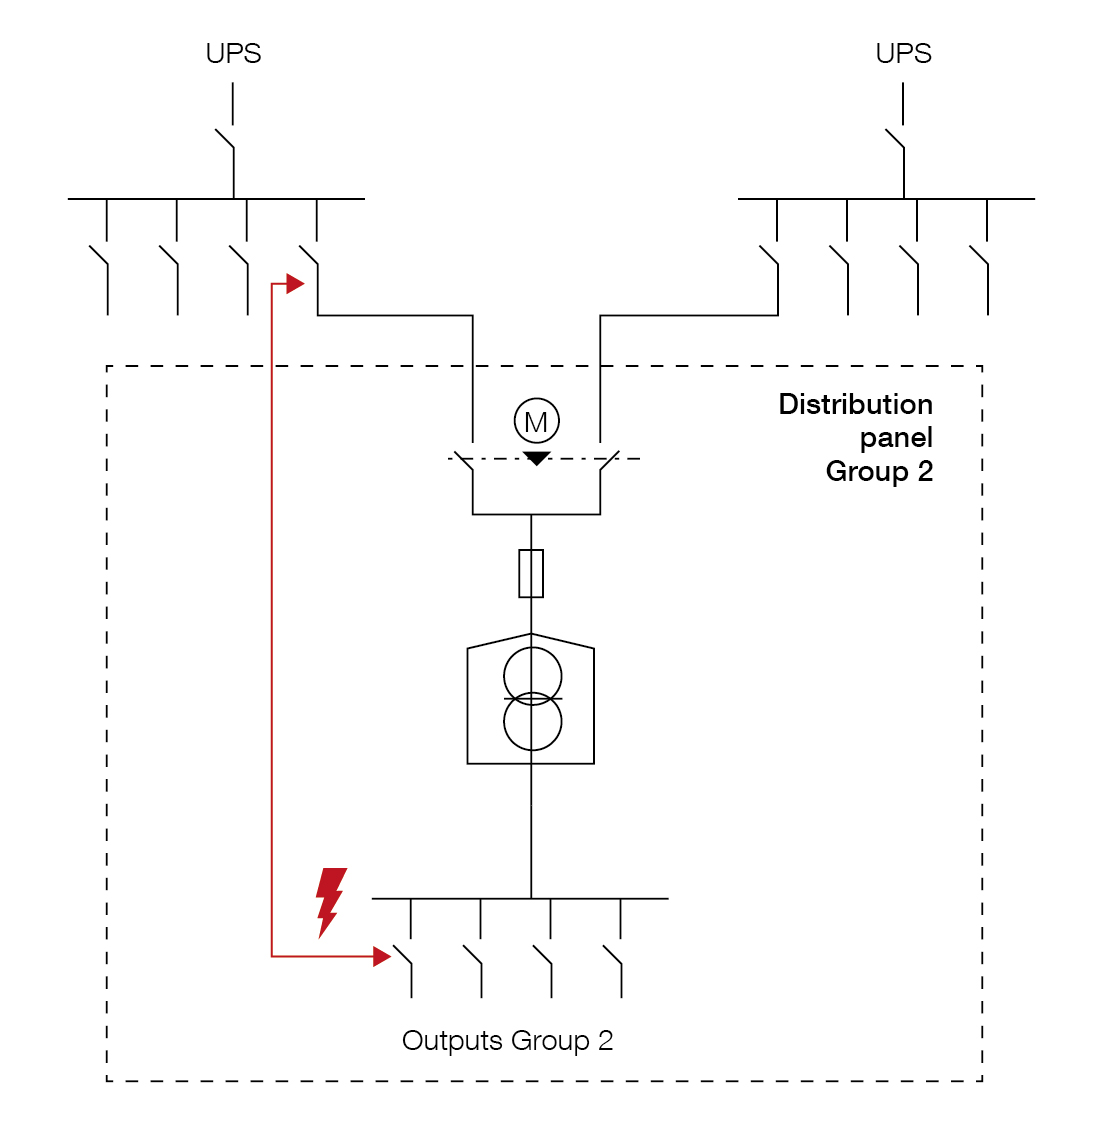 Illustration of an example of a typical Group 2 installation architecture